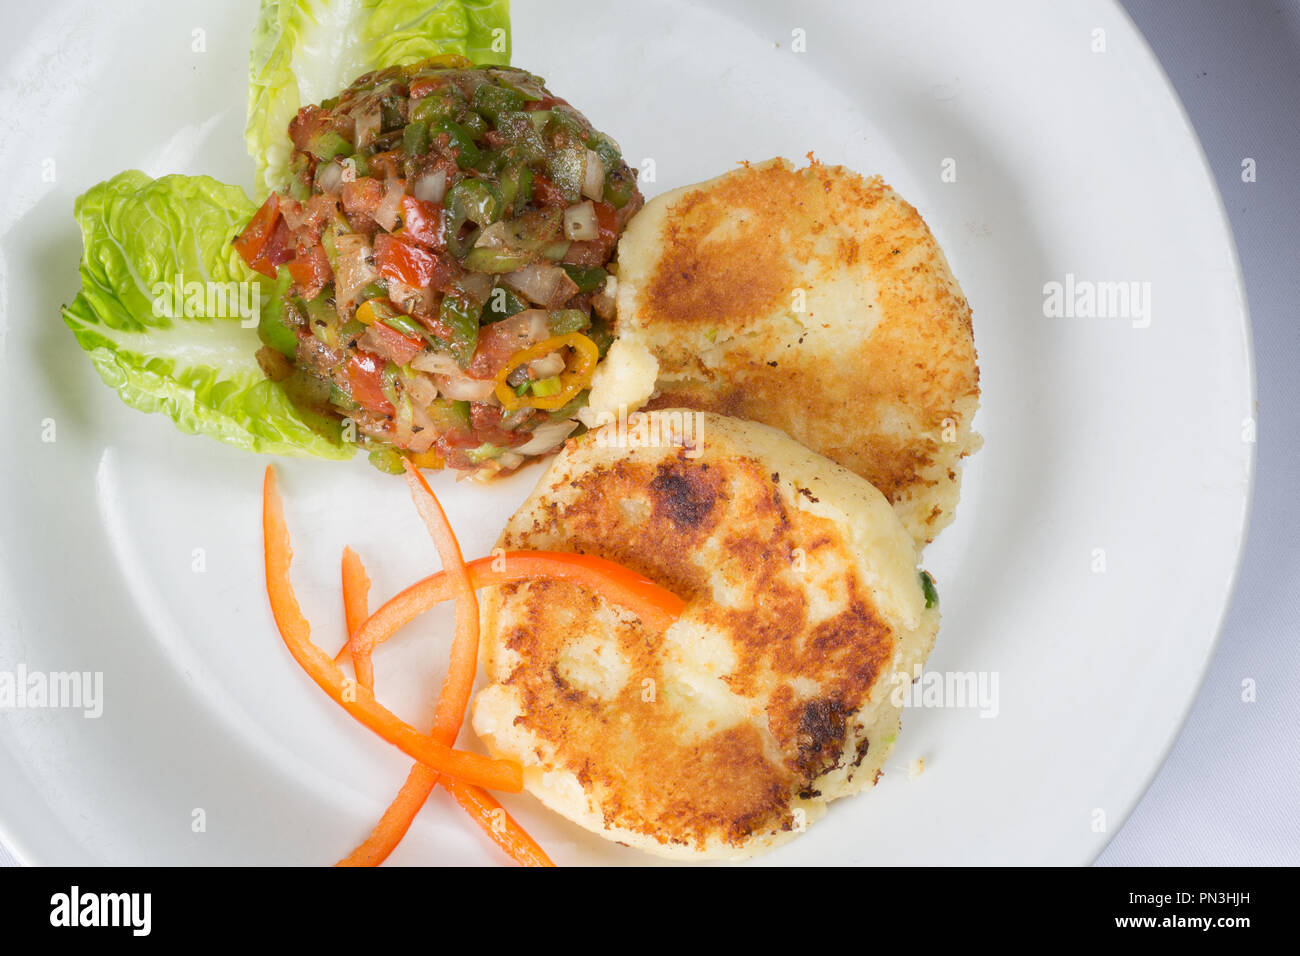 Plated entree dish of sauteed cheese potato cake with a chili and pepper salsa Stock Photo